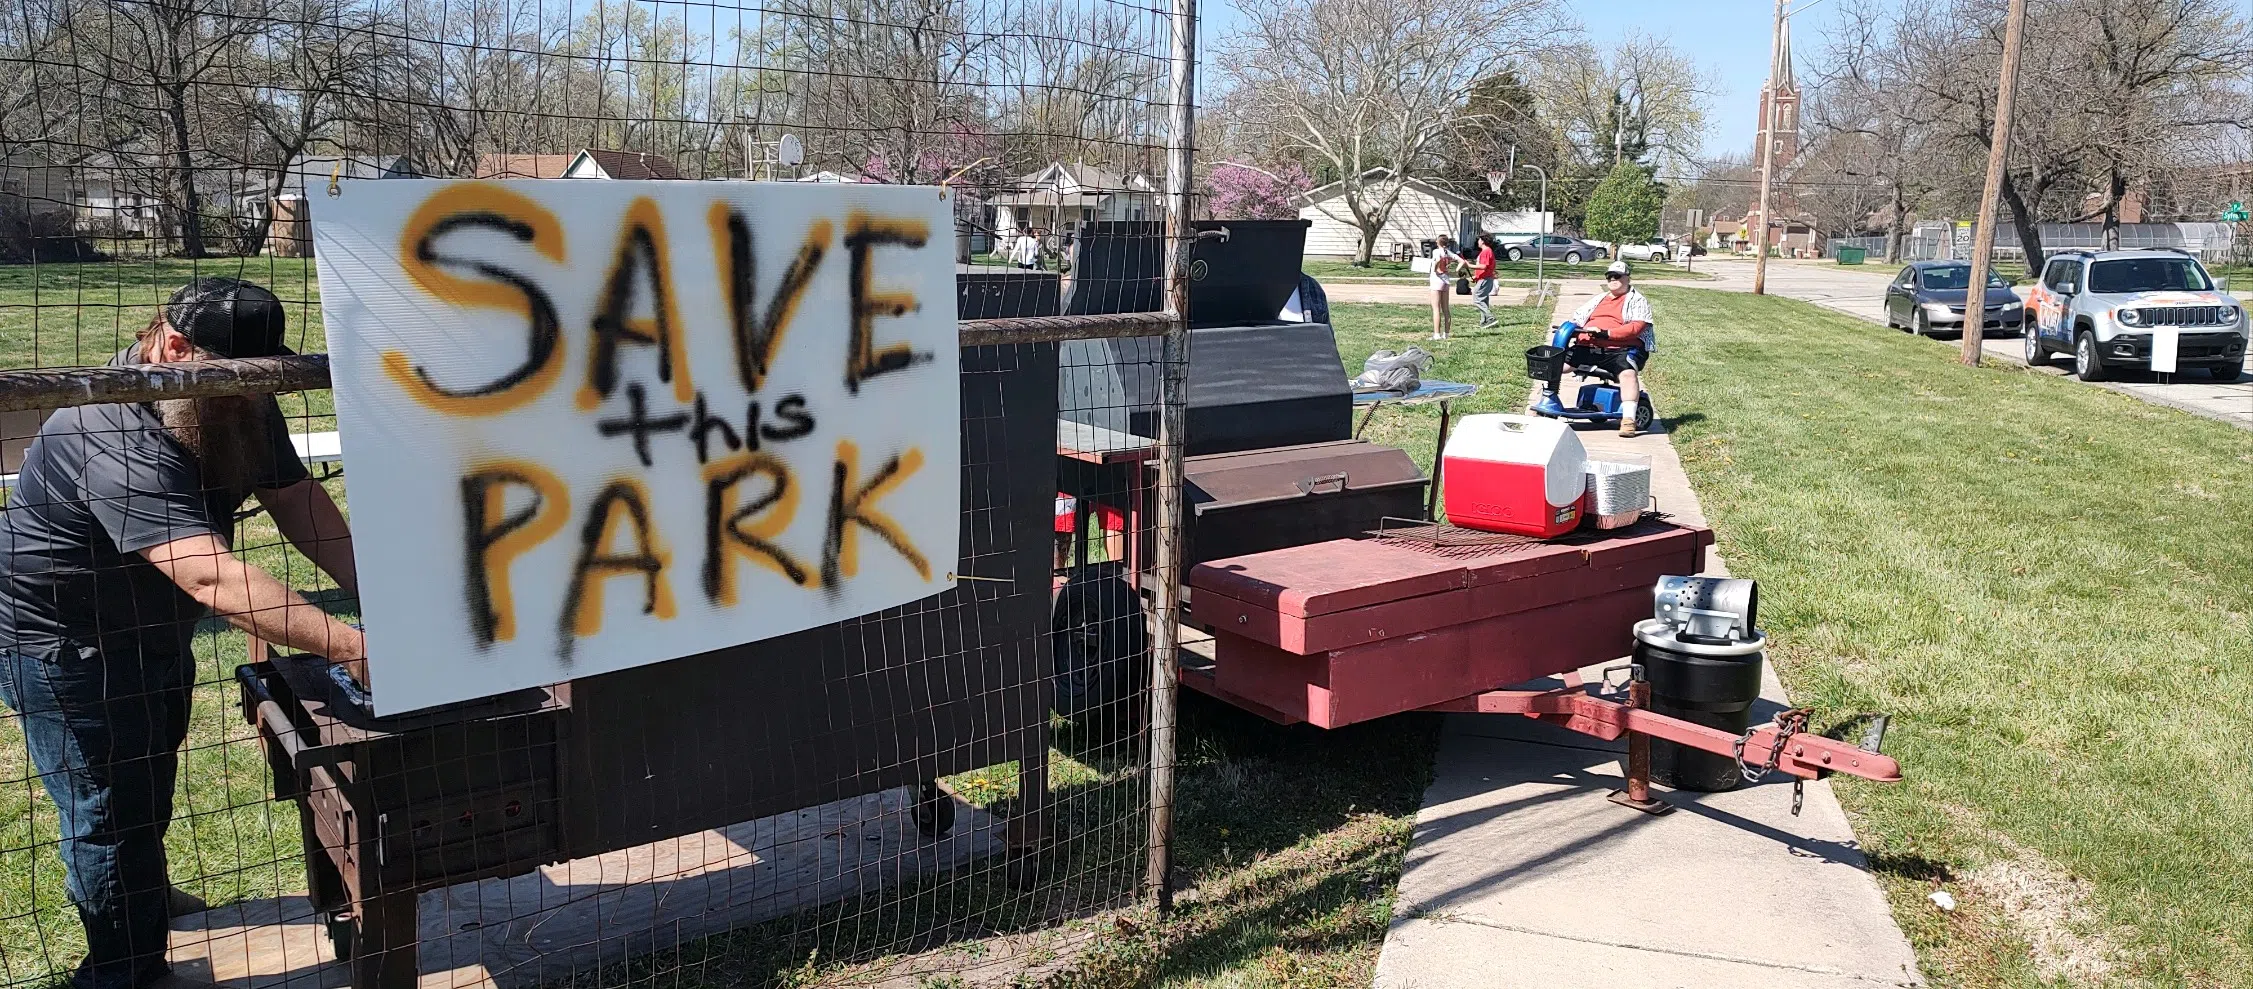 QUAKER PARK: Residents gather for community bbq at Quaker Saturday as protest period for potential sale nears deadline